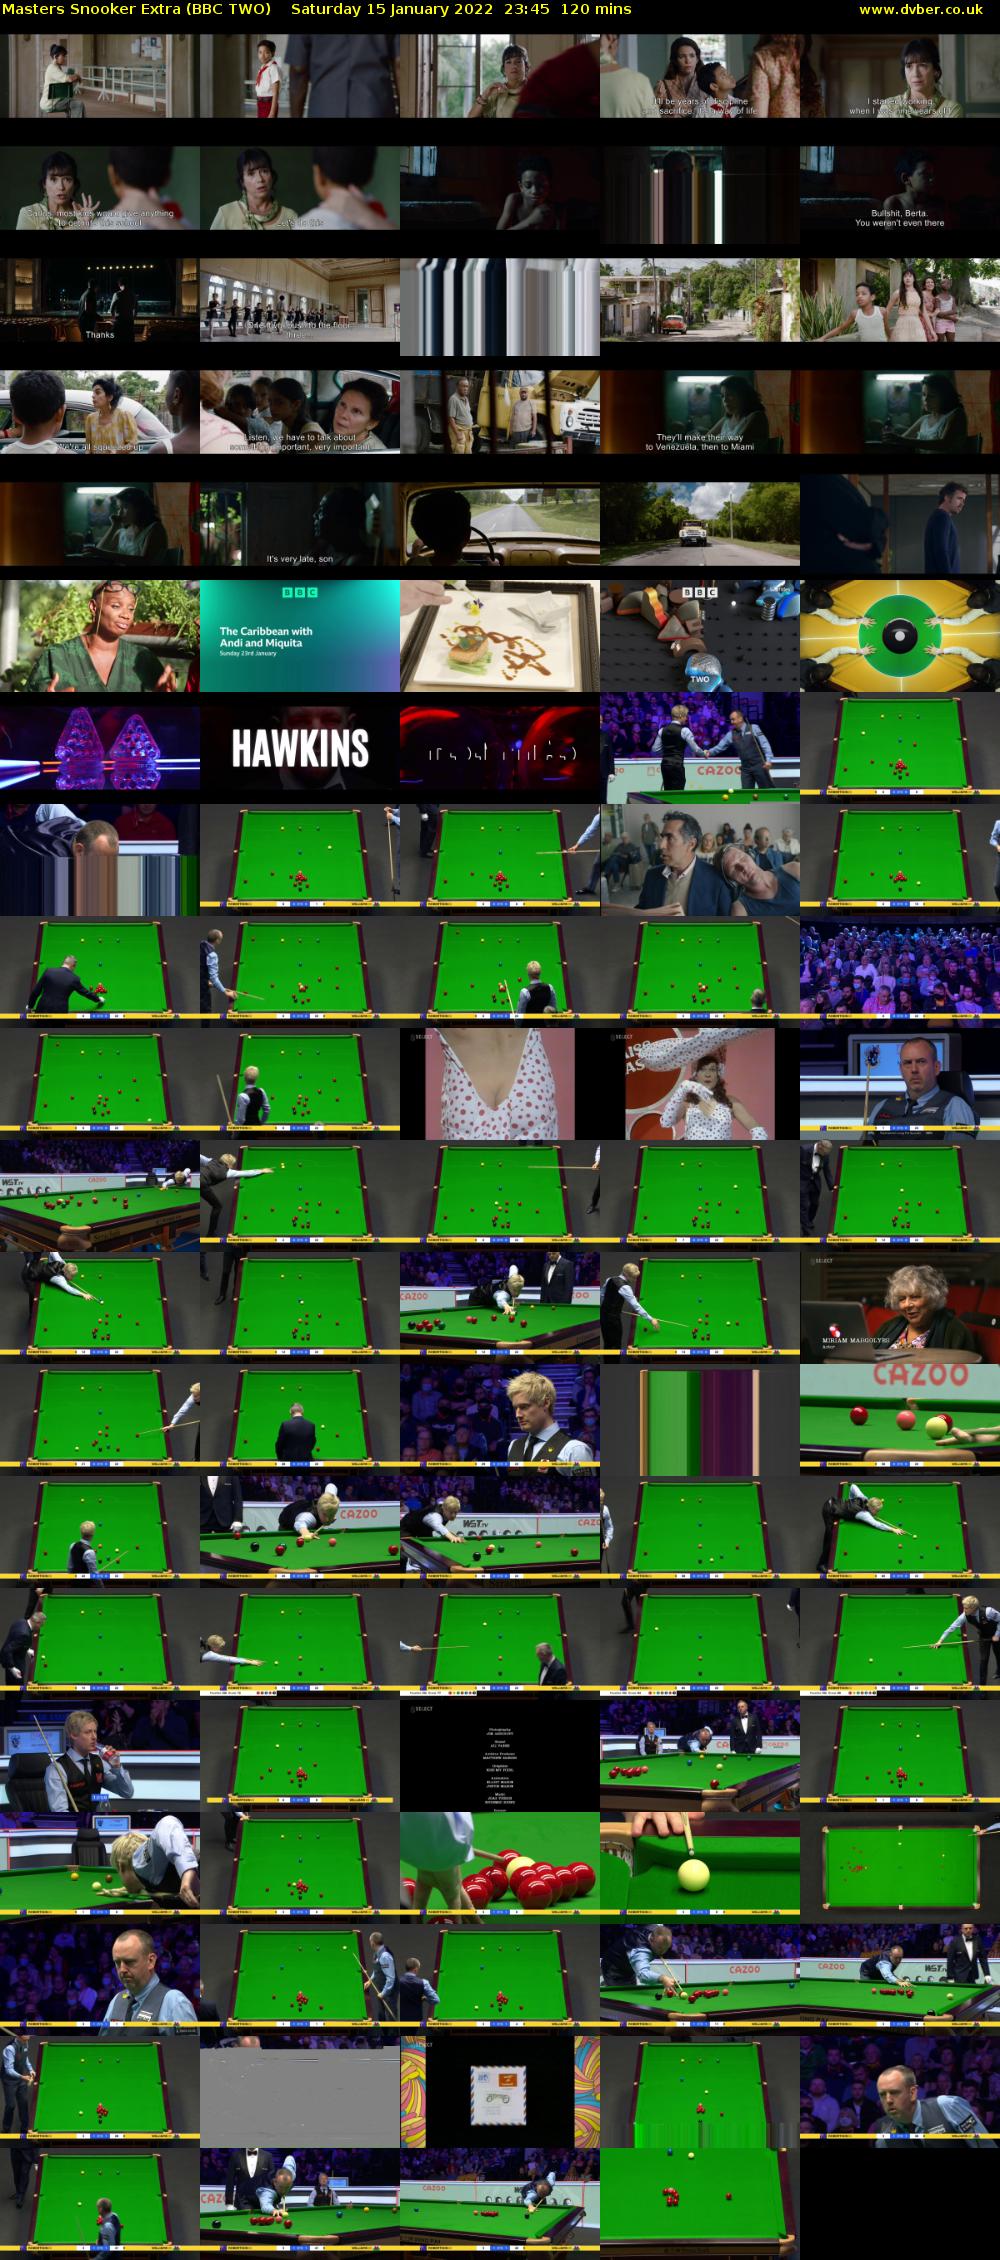 Masters Snooker Extra (BBC TWO) Saturday 15 January 2022 23:45 - 01:45